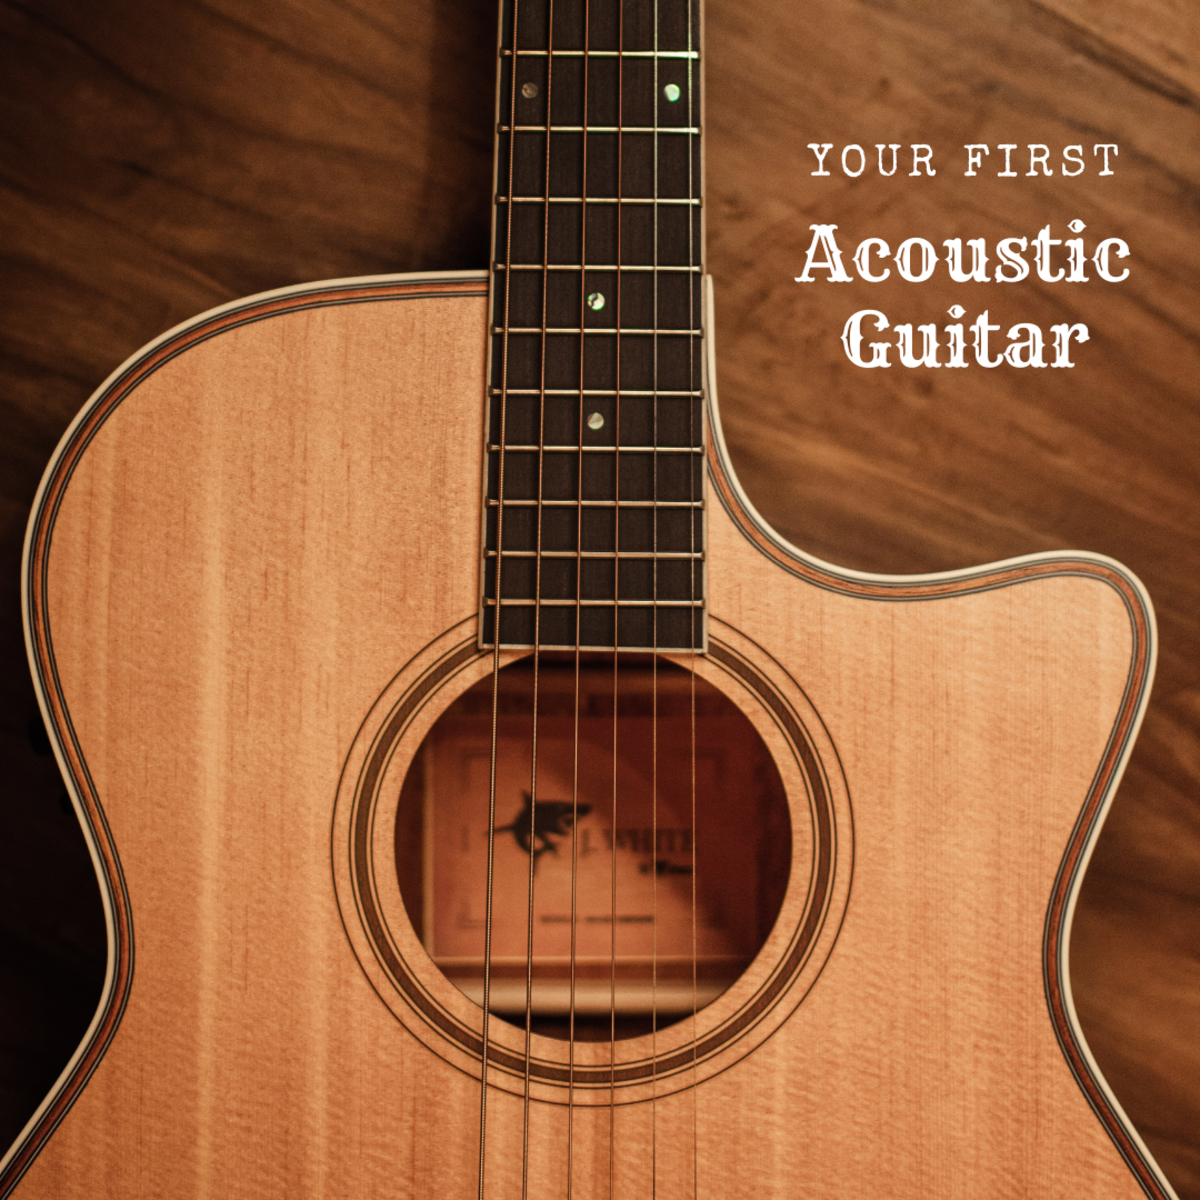 How to Choose an Acoustic Guitar for a Beginner